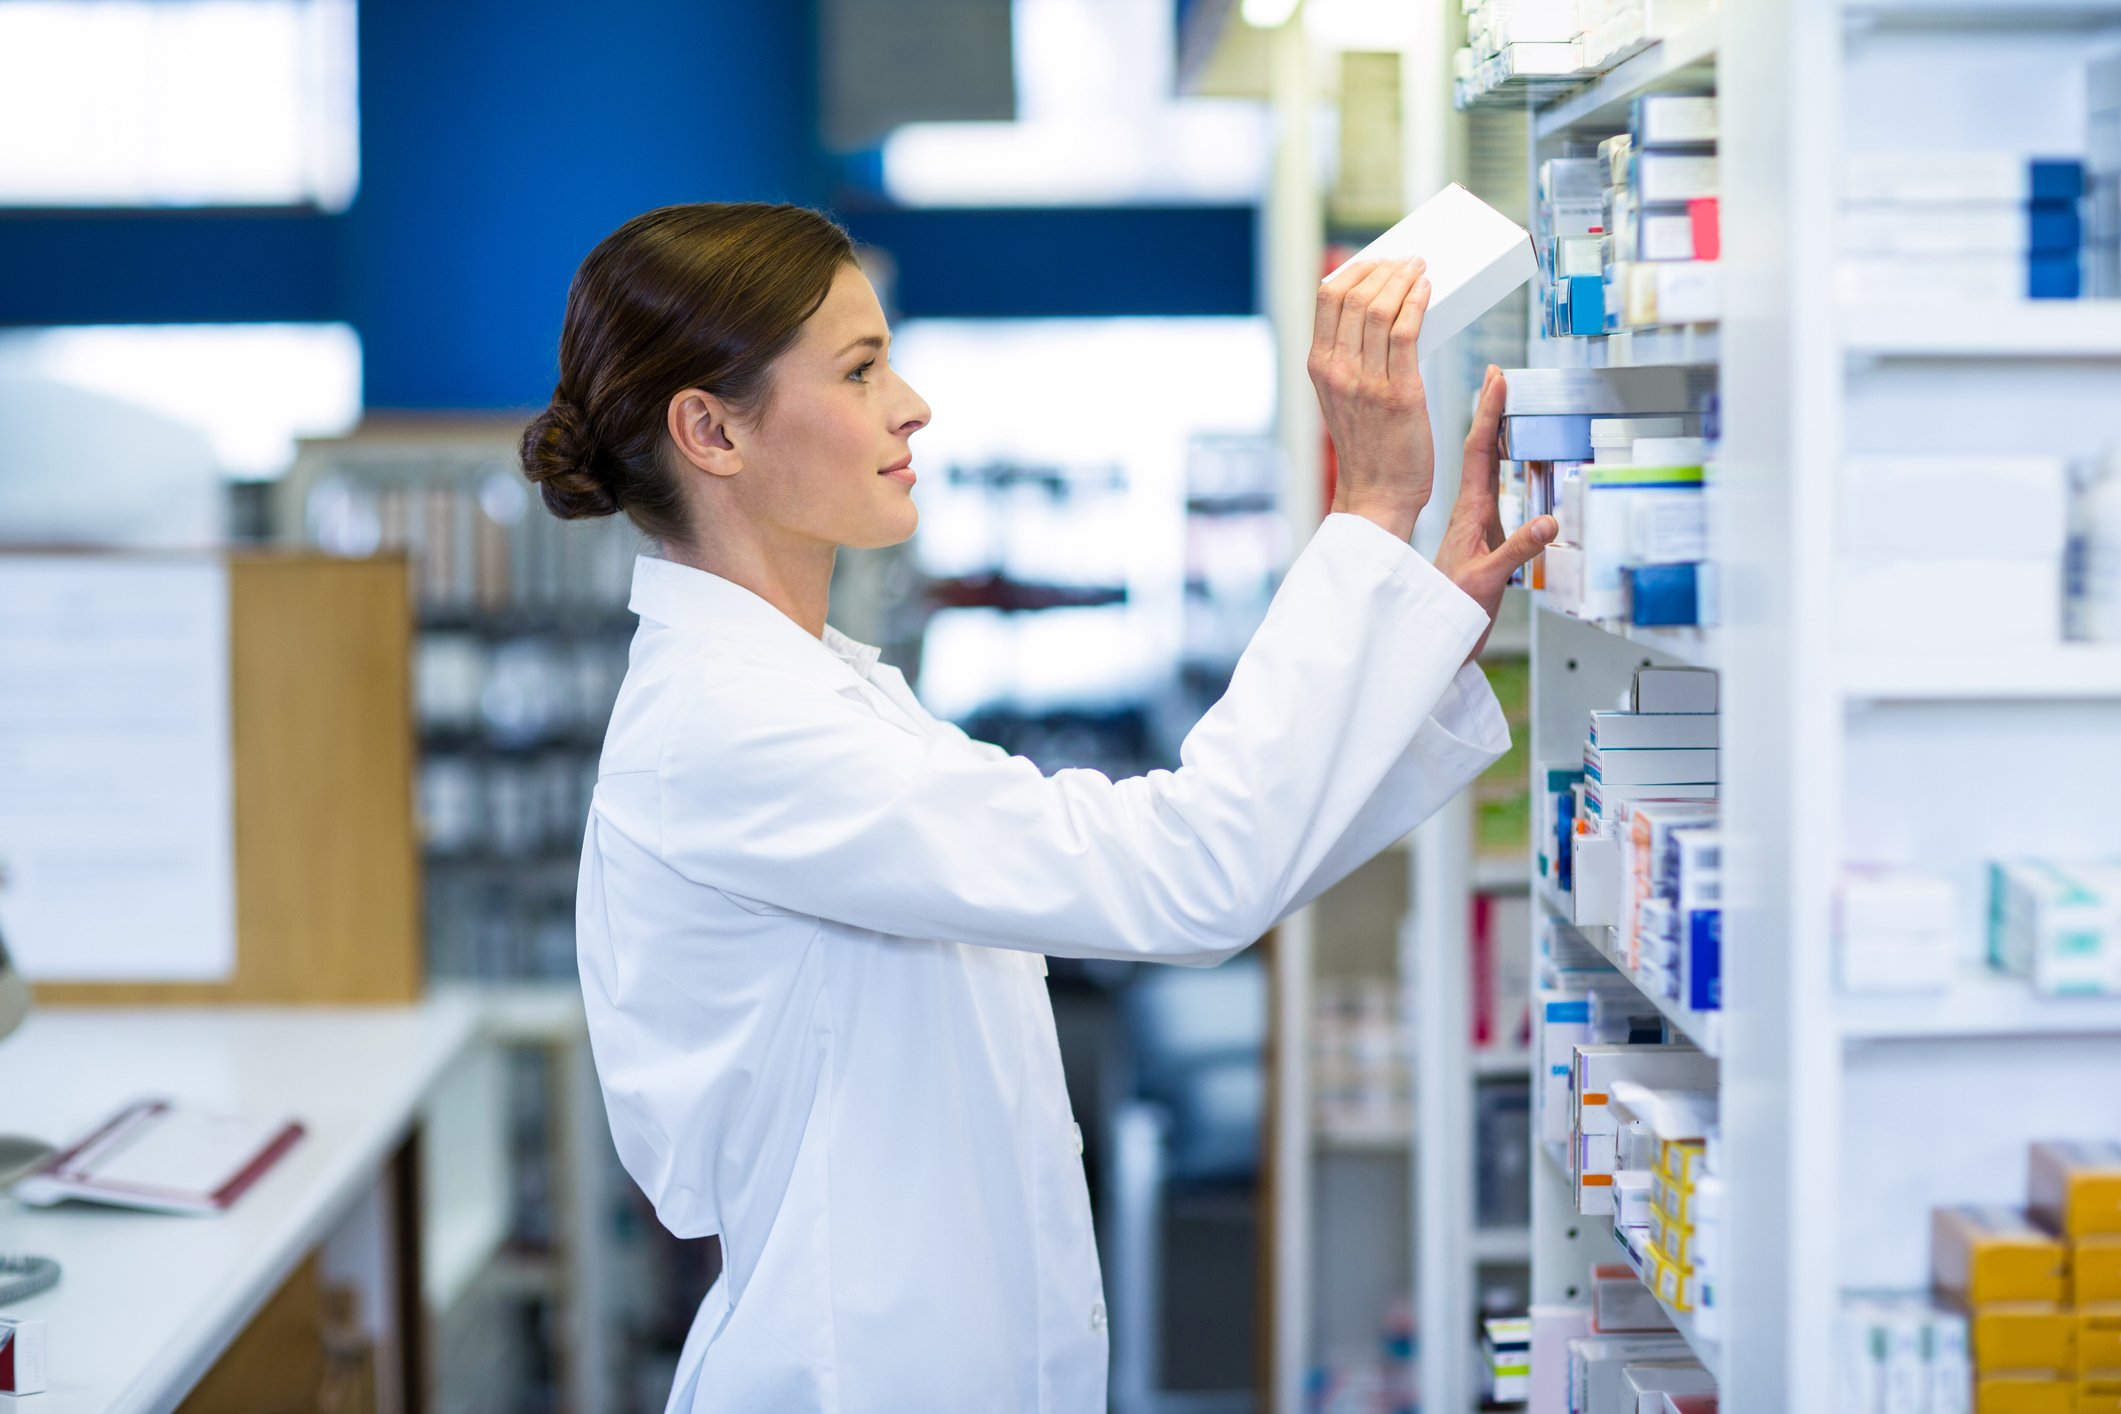 Choosing A Specialty Pharmacy? Here Are 7 Things to Consider